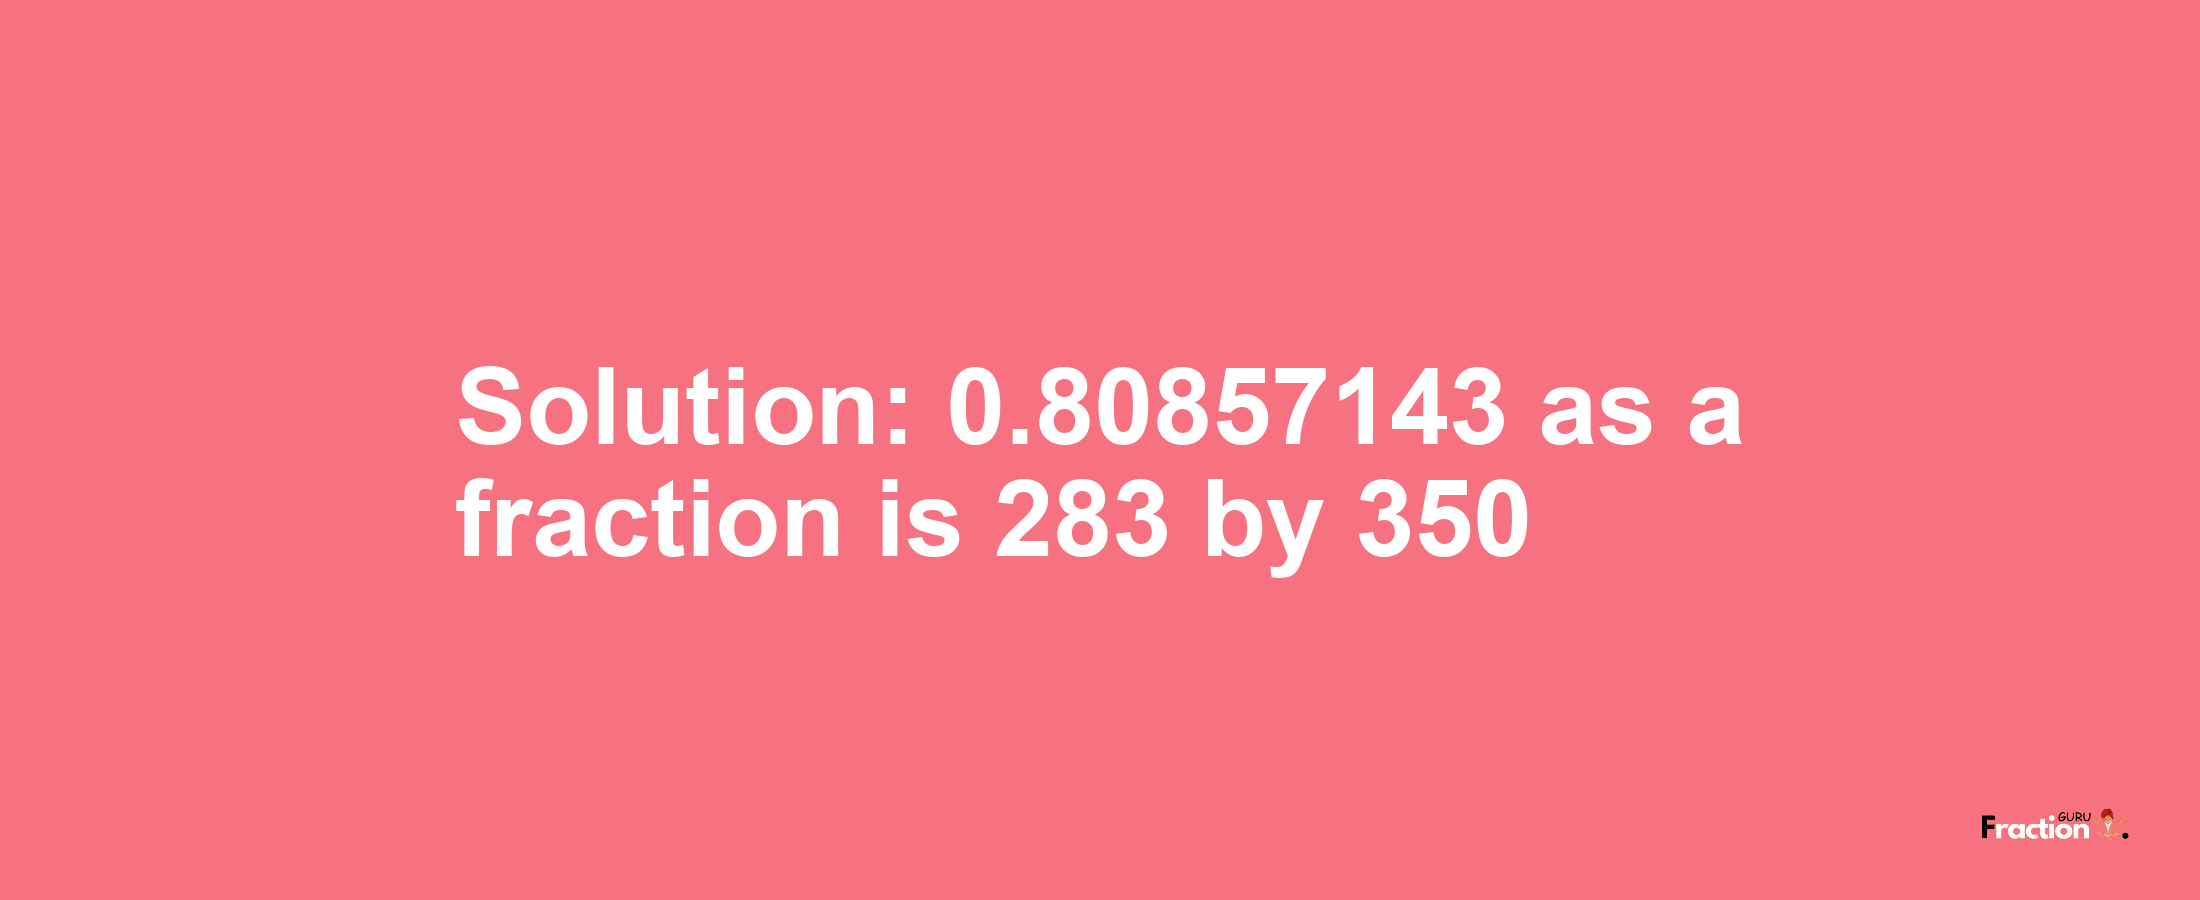 Solution:0.80857143 as a fraction is 283/350